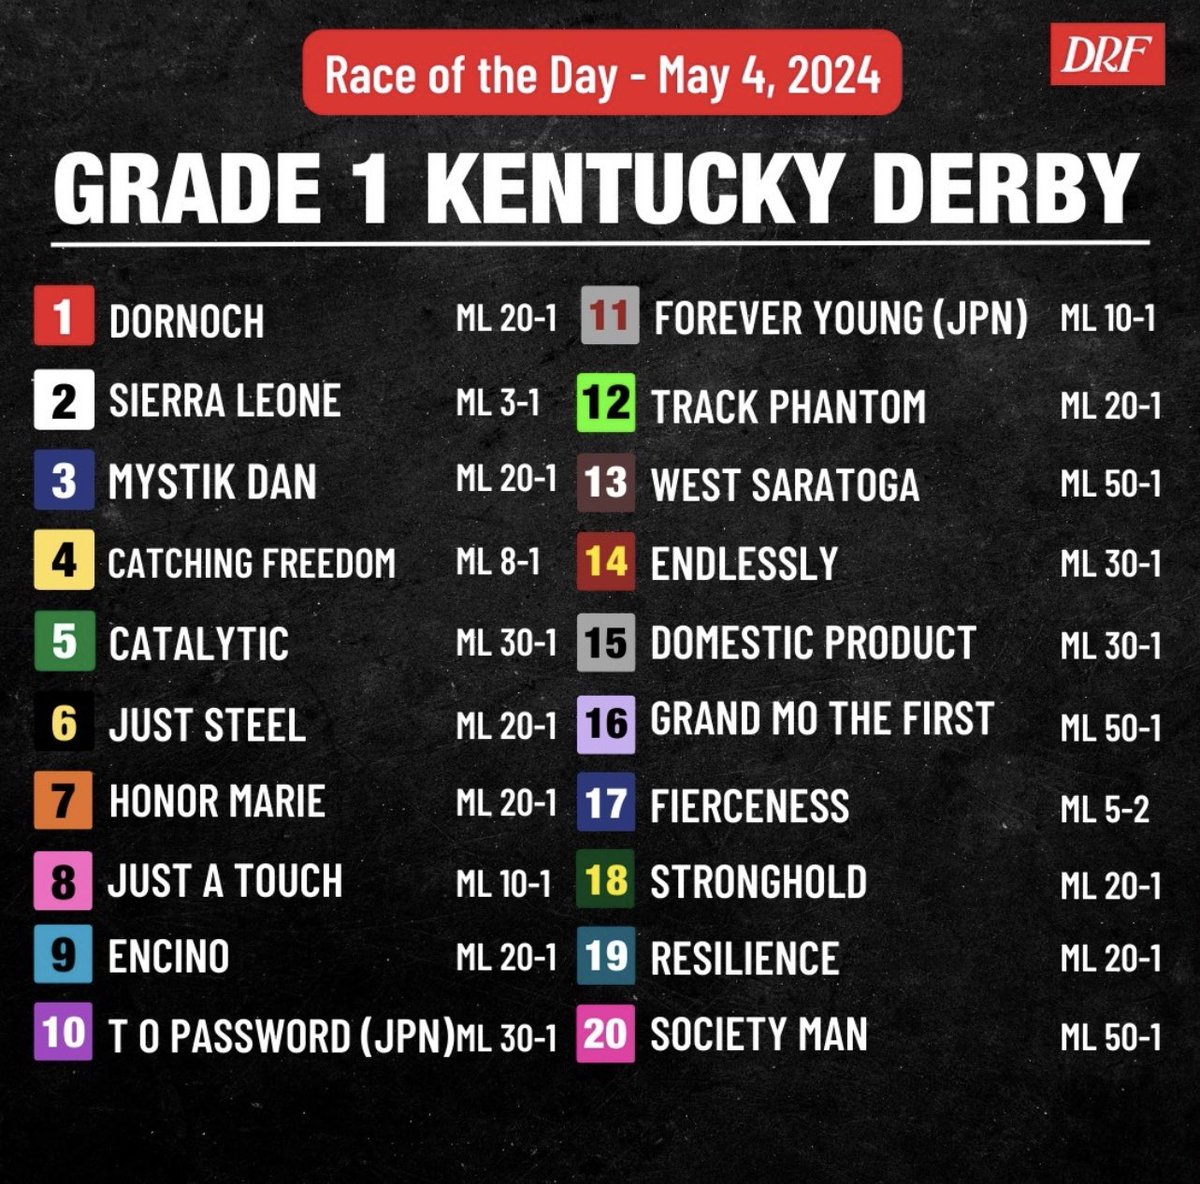 Officially @KentuckyDerby week!
The smell of roses, our Derby dream is alive and well! Best week of the year! 
🏇🏻🏆🍀🌹

Let’s go #14 Endlessly! @umbyrispoli 

#KYDerby150🌹 #Endlessly 
#BusinessTrip #HomeSweetHome #L1C4